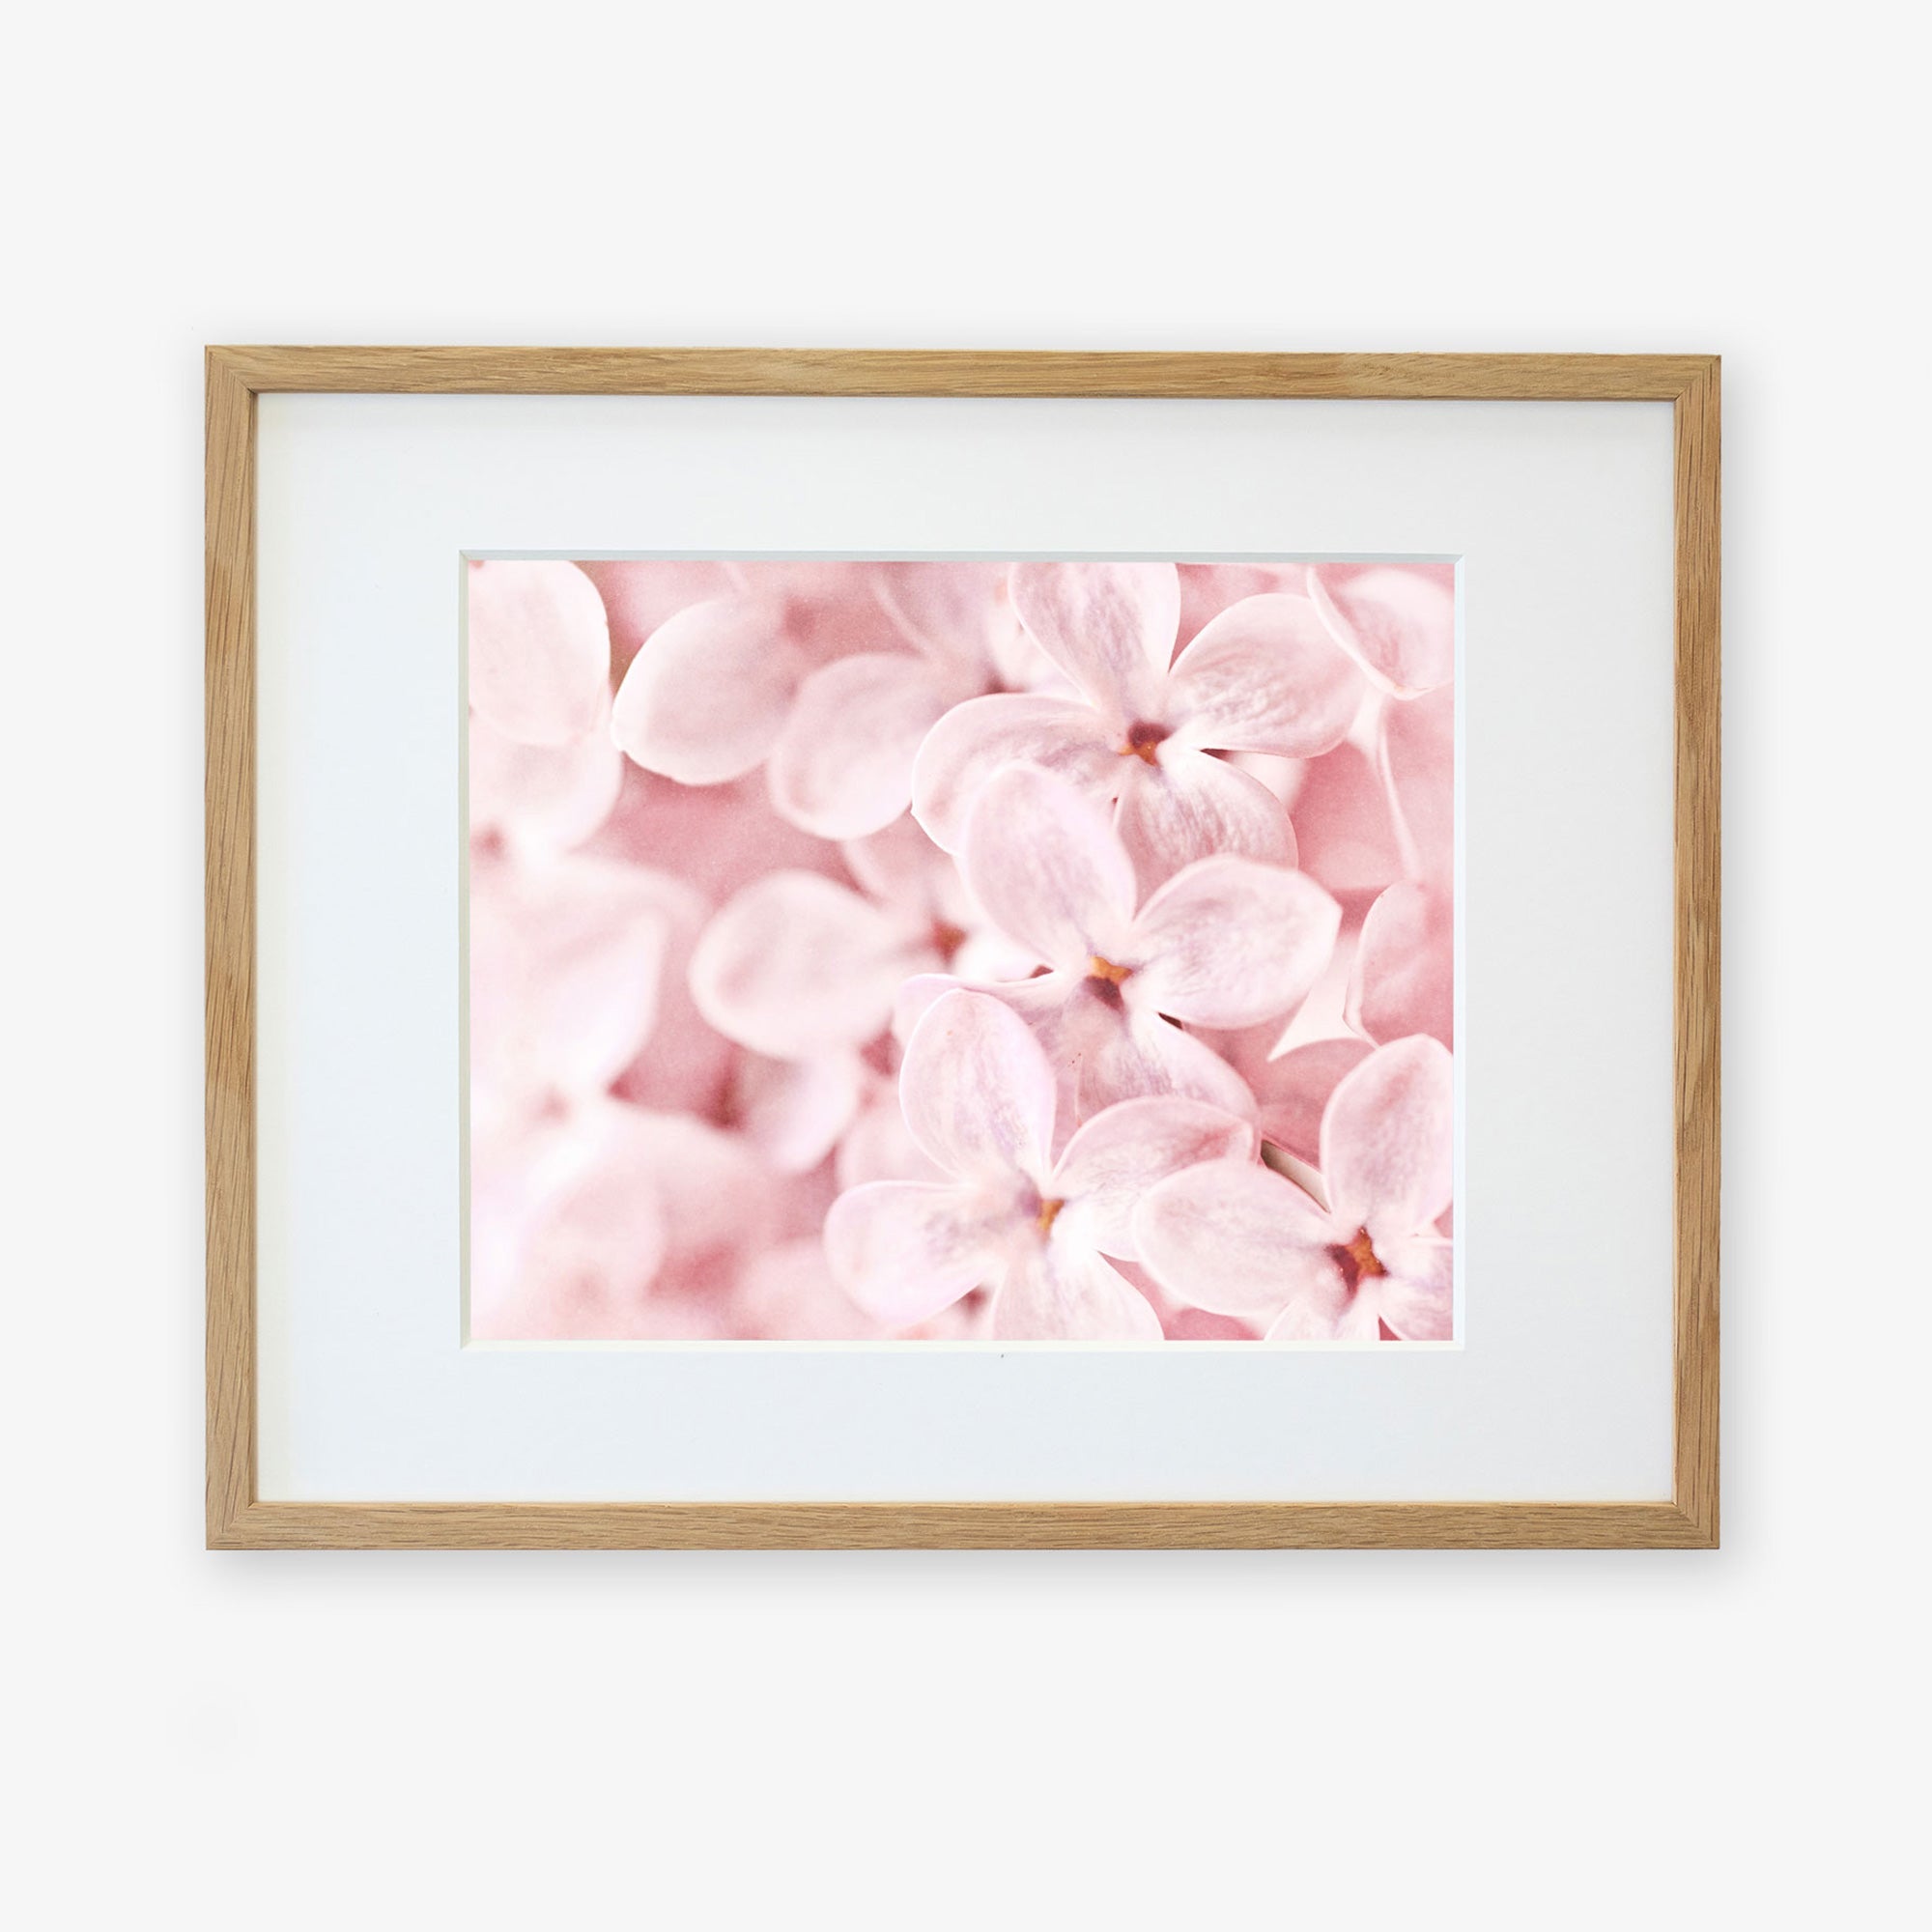 A framed Pink Botanical Print of close-up soft pink hydrangea flowers, printed on archival photographic paper and displayed with a white mat in a light wooden frame against a white background. Designed by Offley Green.